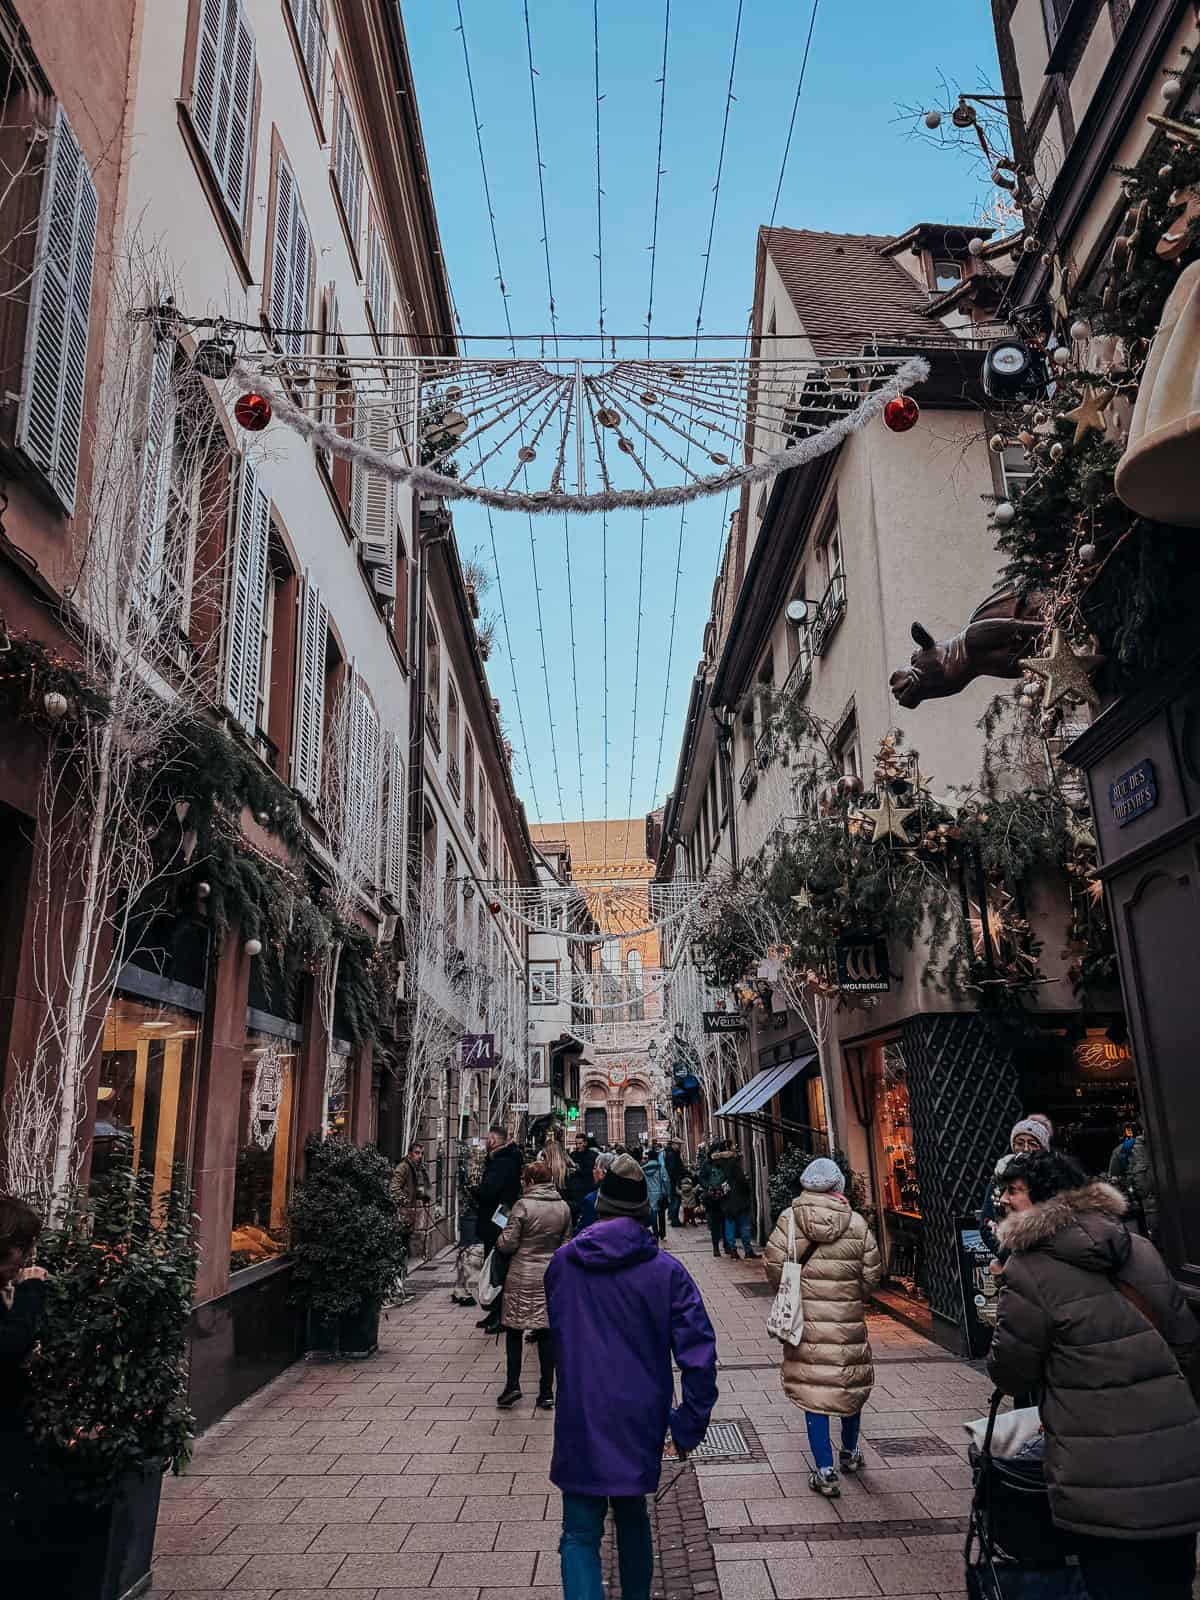 A narrow and bustling Christmas market street adorned with festive lights and decorations, flanked by traditional buildings and filled with holiday shoppers.